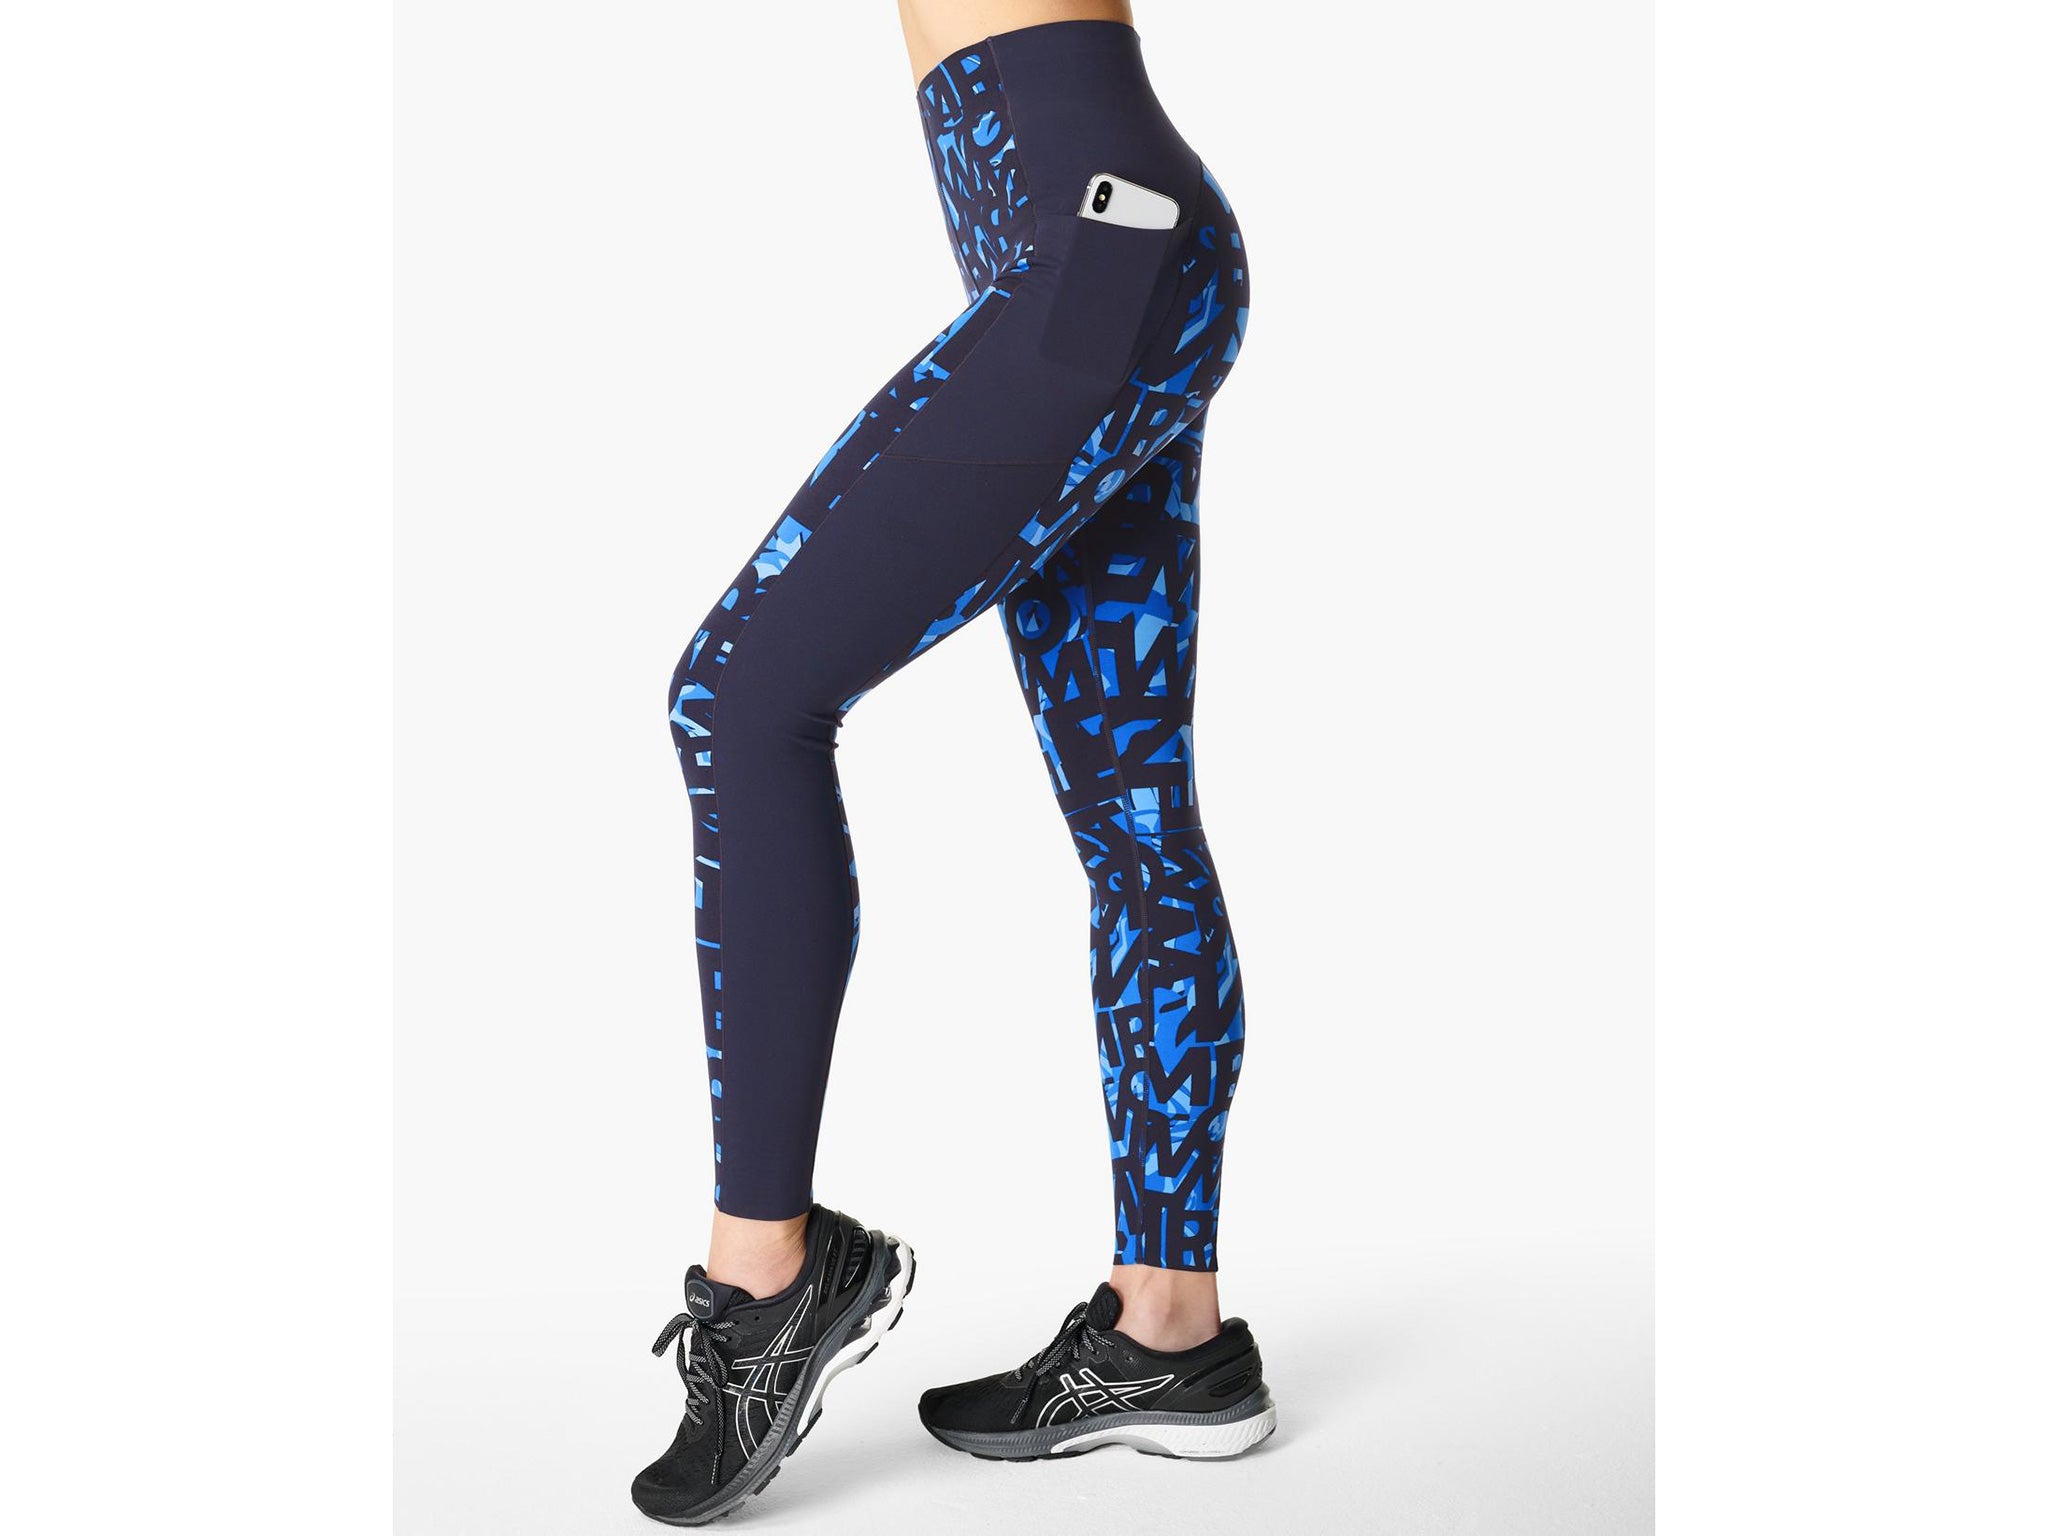 Sweaty Betty's Spring Sale is live: Get up to 60% off leggings, sports bras,  more from $5